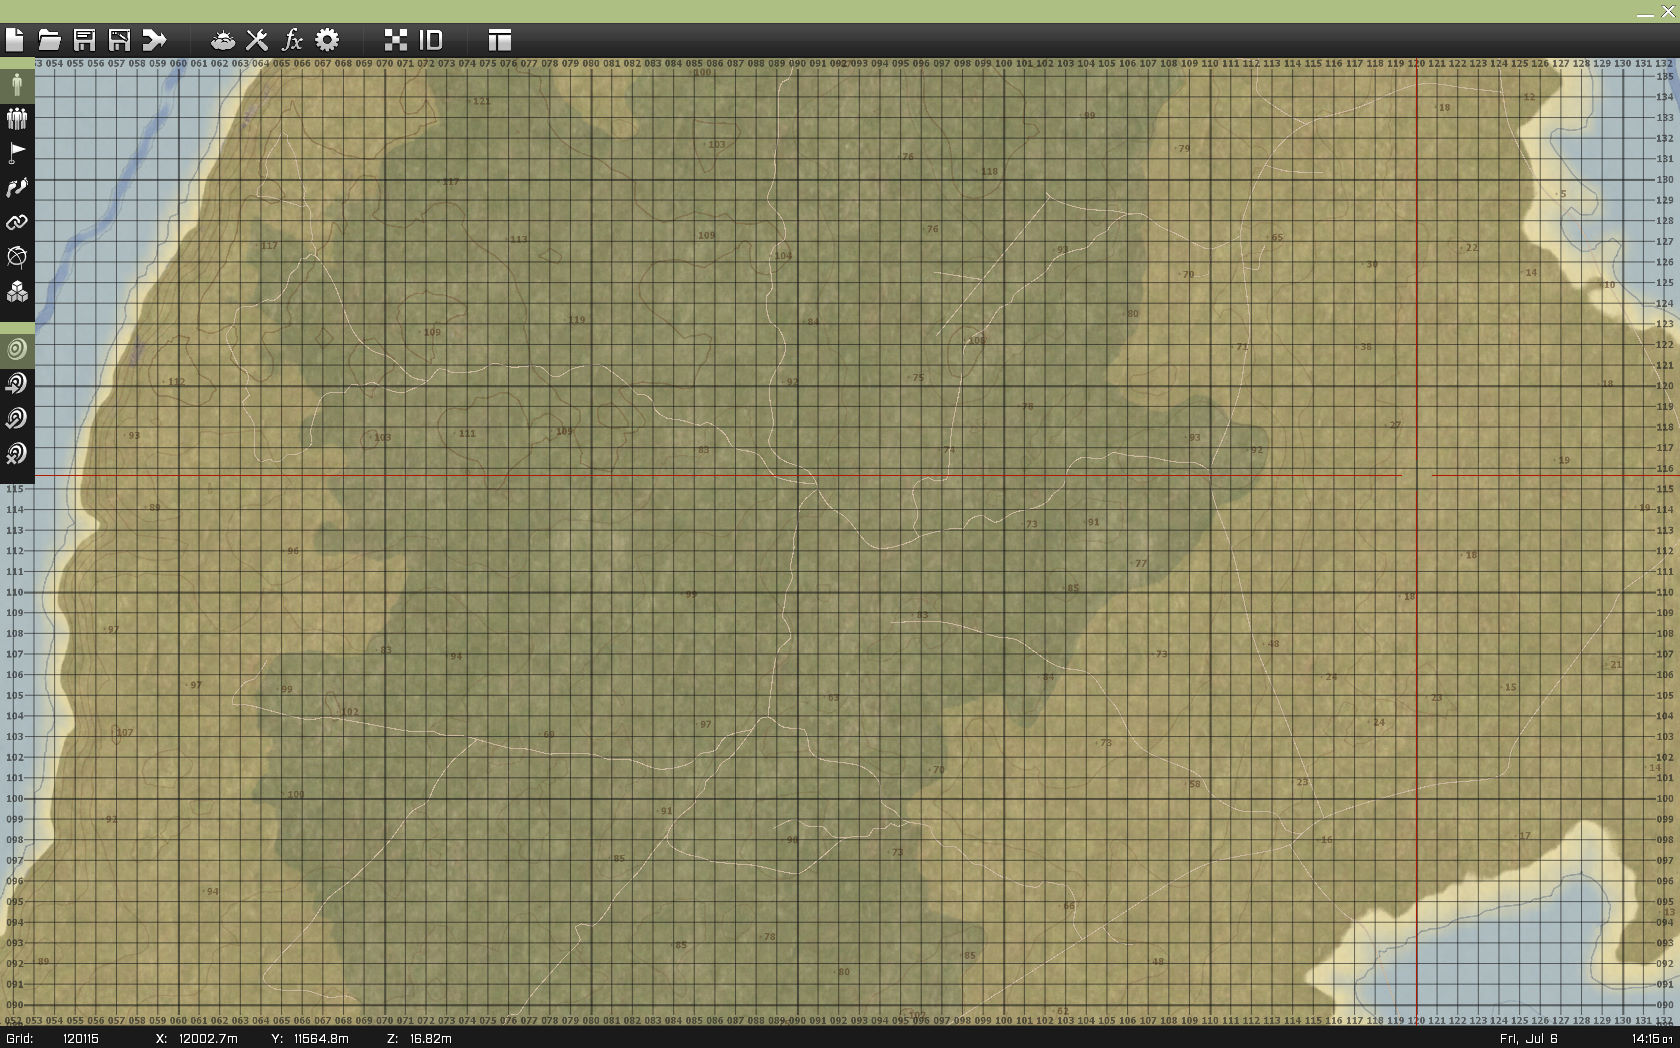 pmc.editing.wiki_images_arma-3-road-shape-file-making-guide-08.jpg